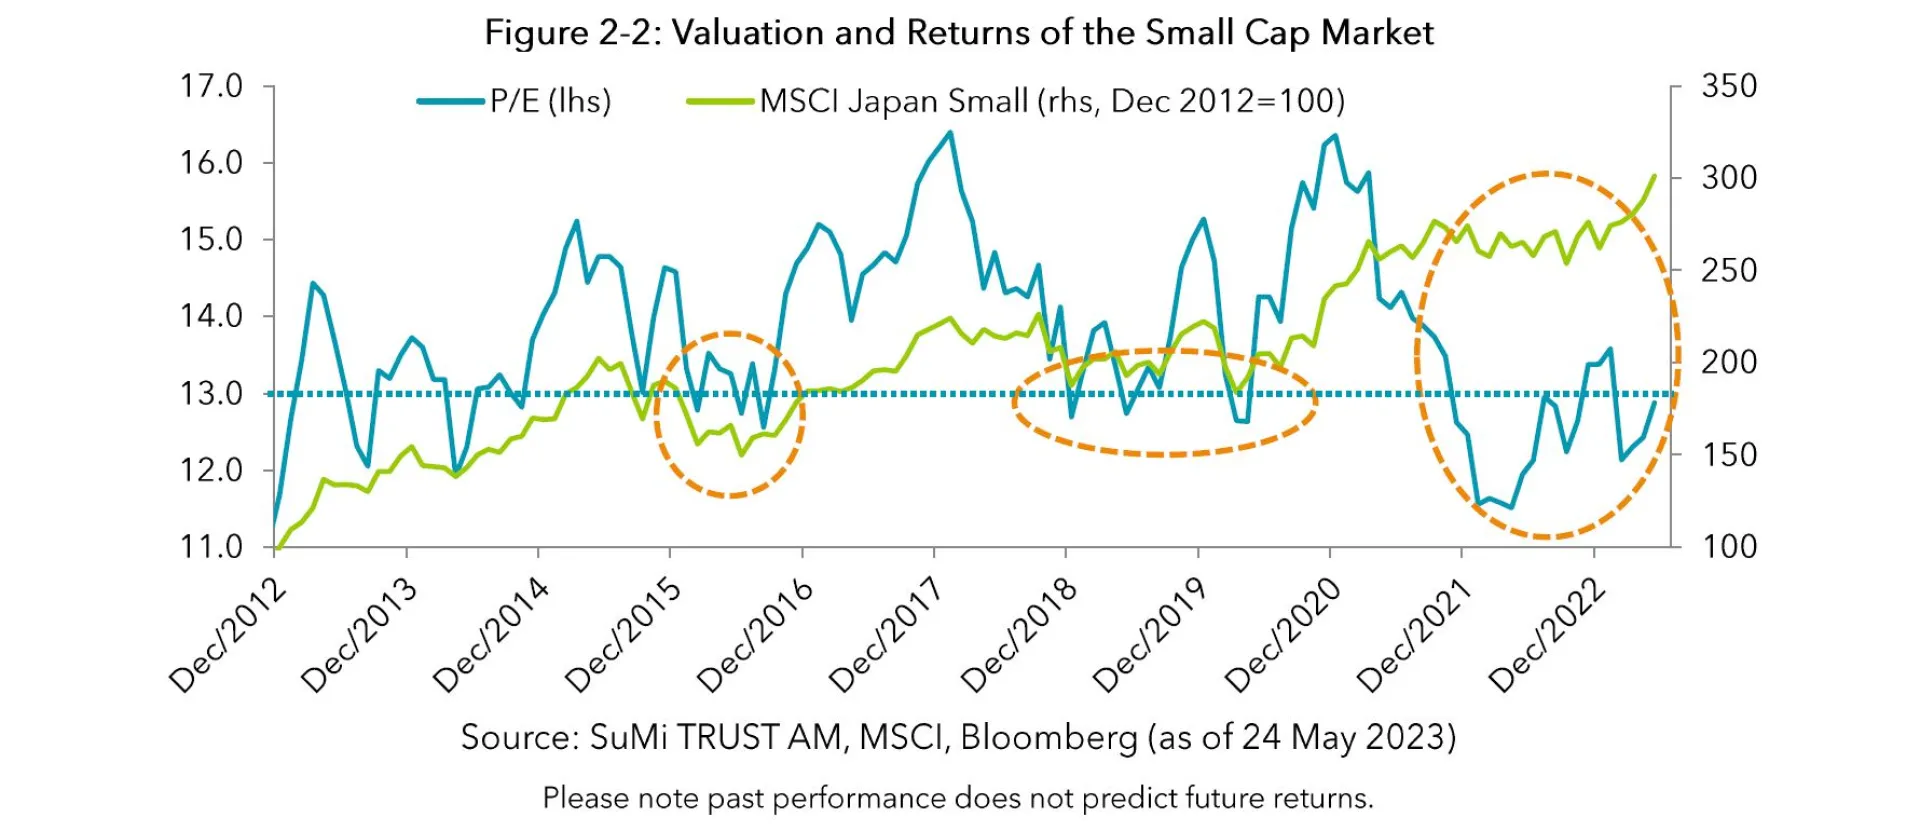 Figure 2-2 Valuation and Returns of the Small Cap Market